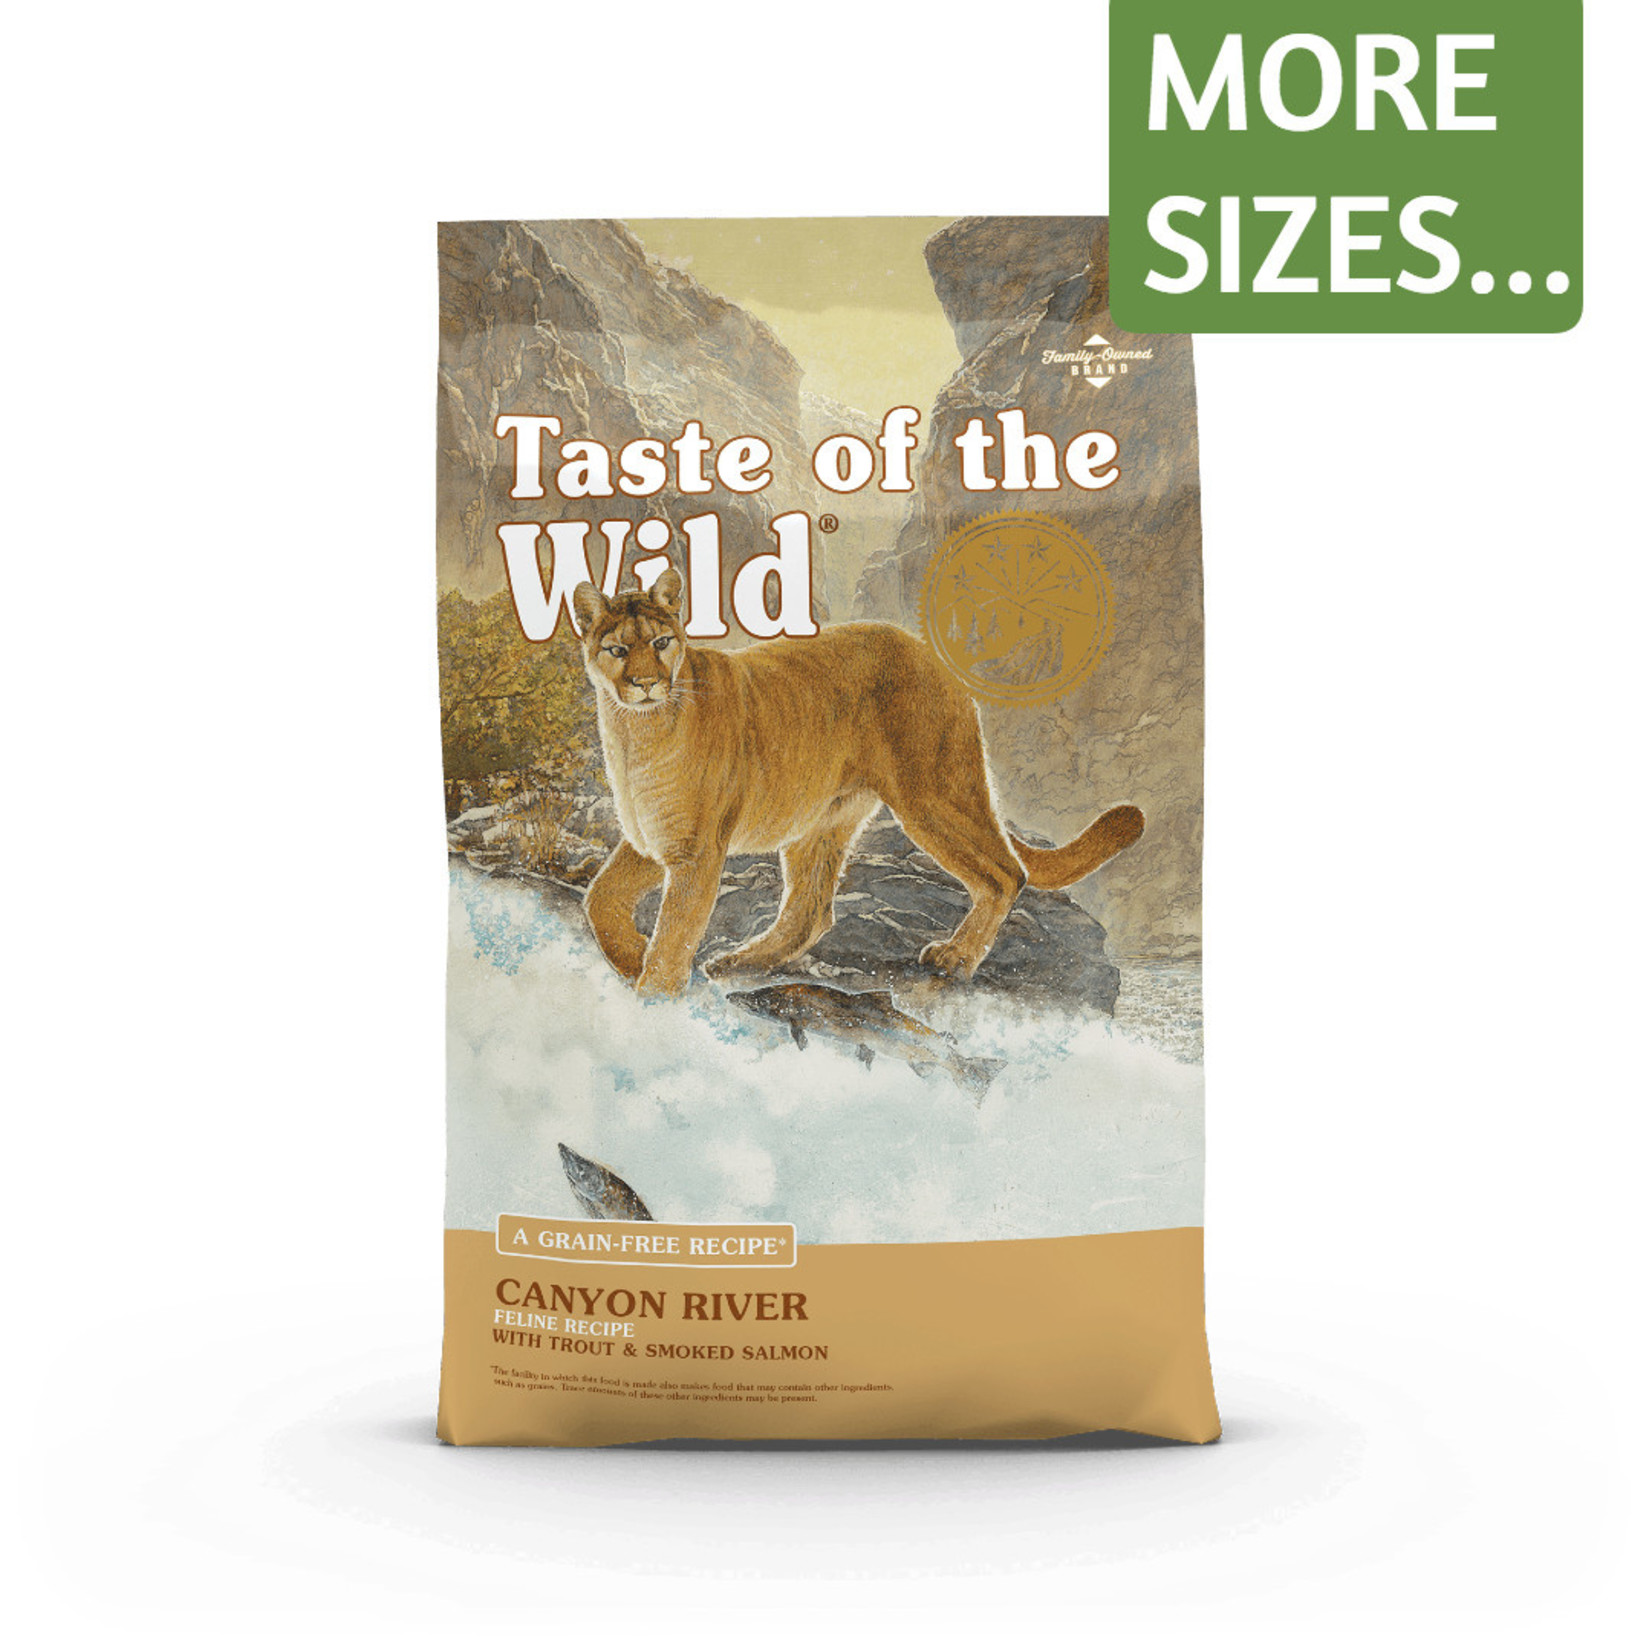 Taste of the Wild Taste of the Wild Dry Cat Food Canyon River Recipe with Trout & Smoked Salmon Grain Free